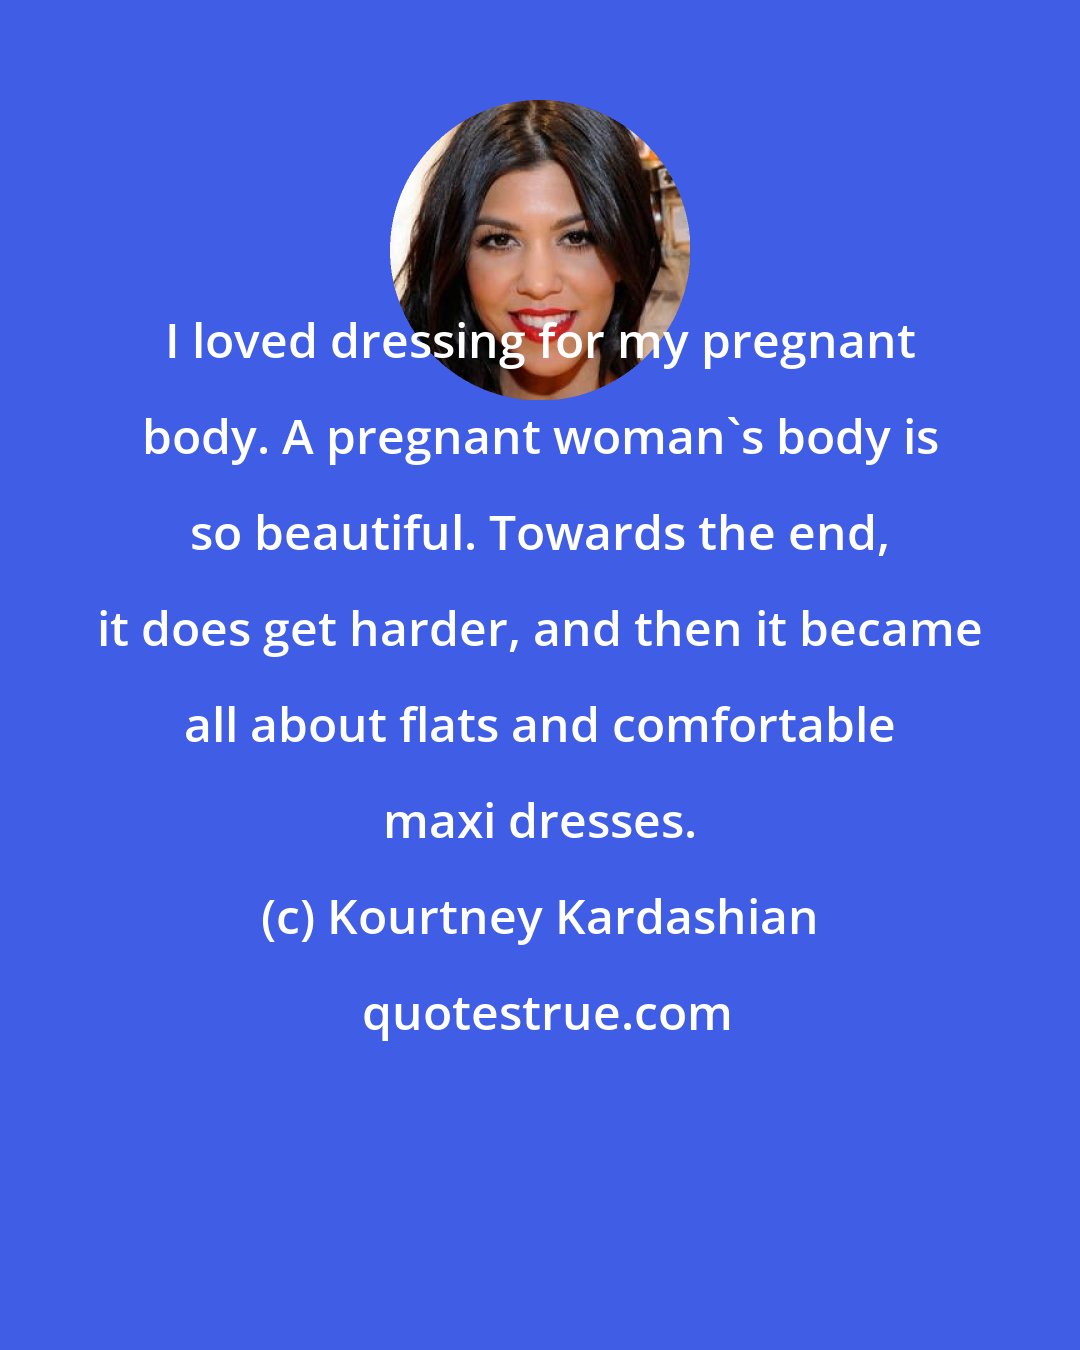 Kourtney Kardashian: I loved dressing for my pregnant body. A pregnant woman's body is so beautiful. Towards the end, it does get harder, and then it became all about flats and comfortable maxi dresses.